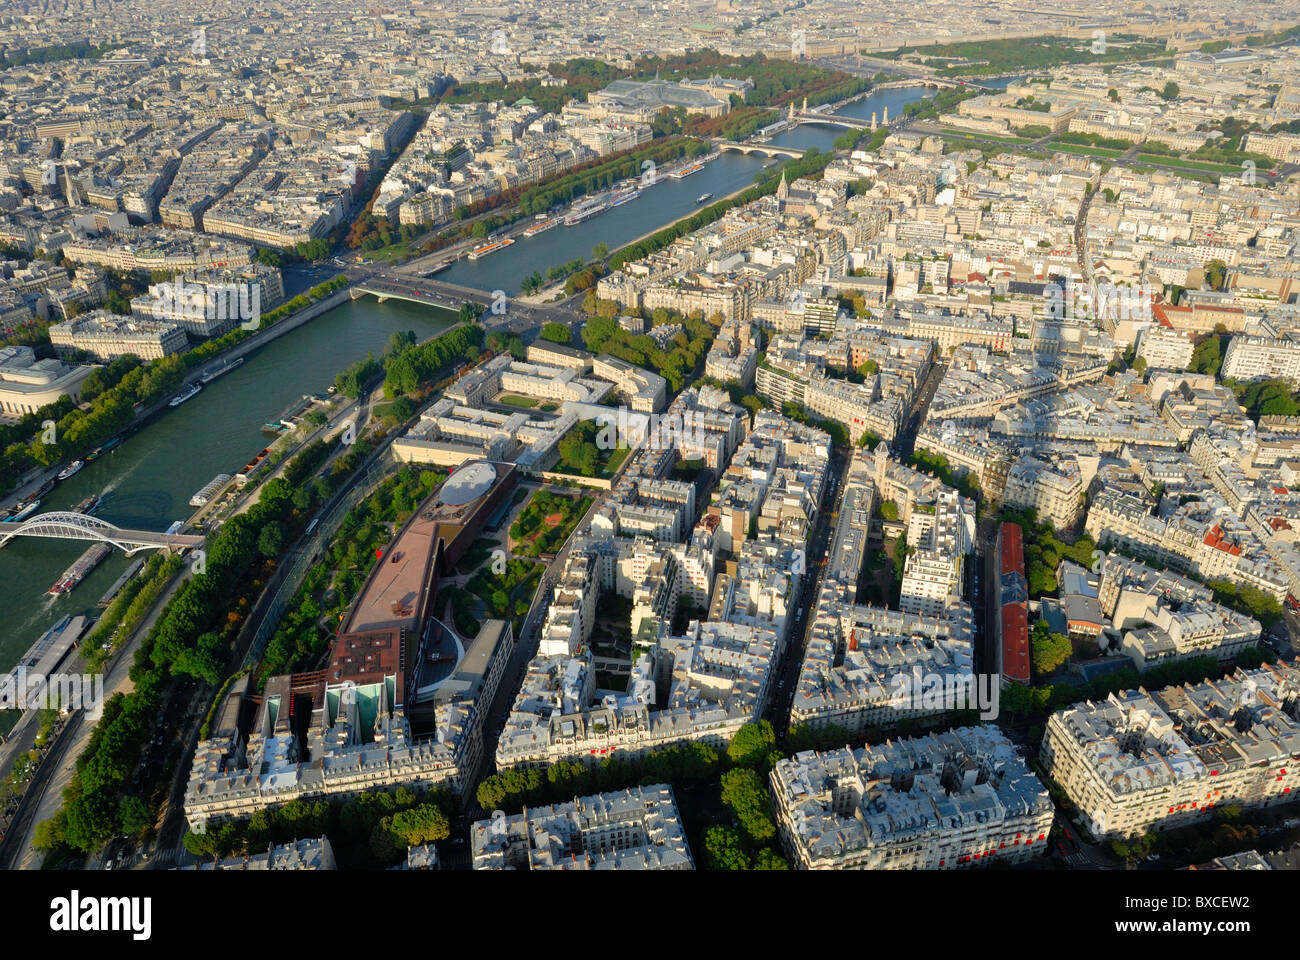 Northeast view of Paris city from the Eiffel Tower looking towards the River Seine. Stock Photo